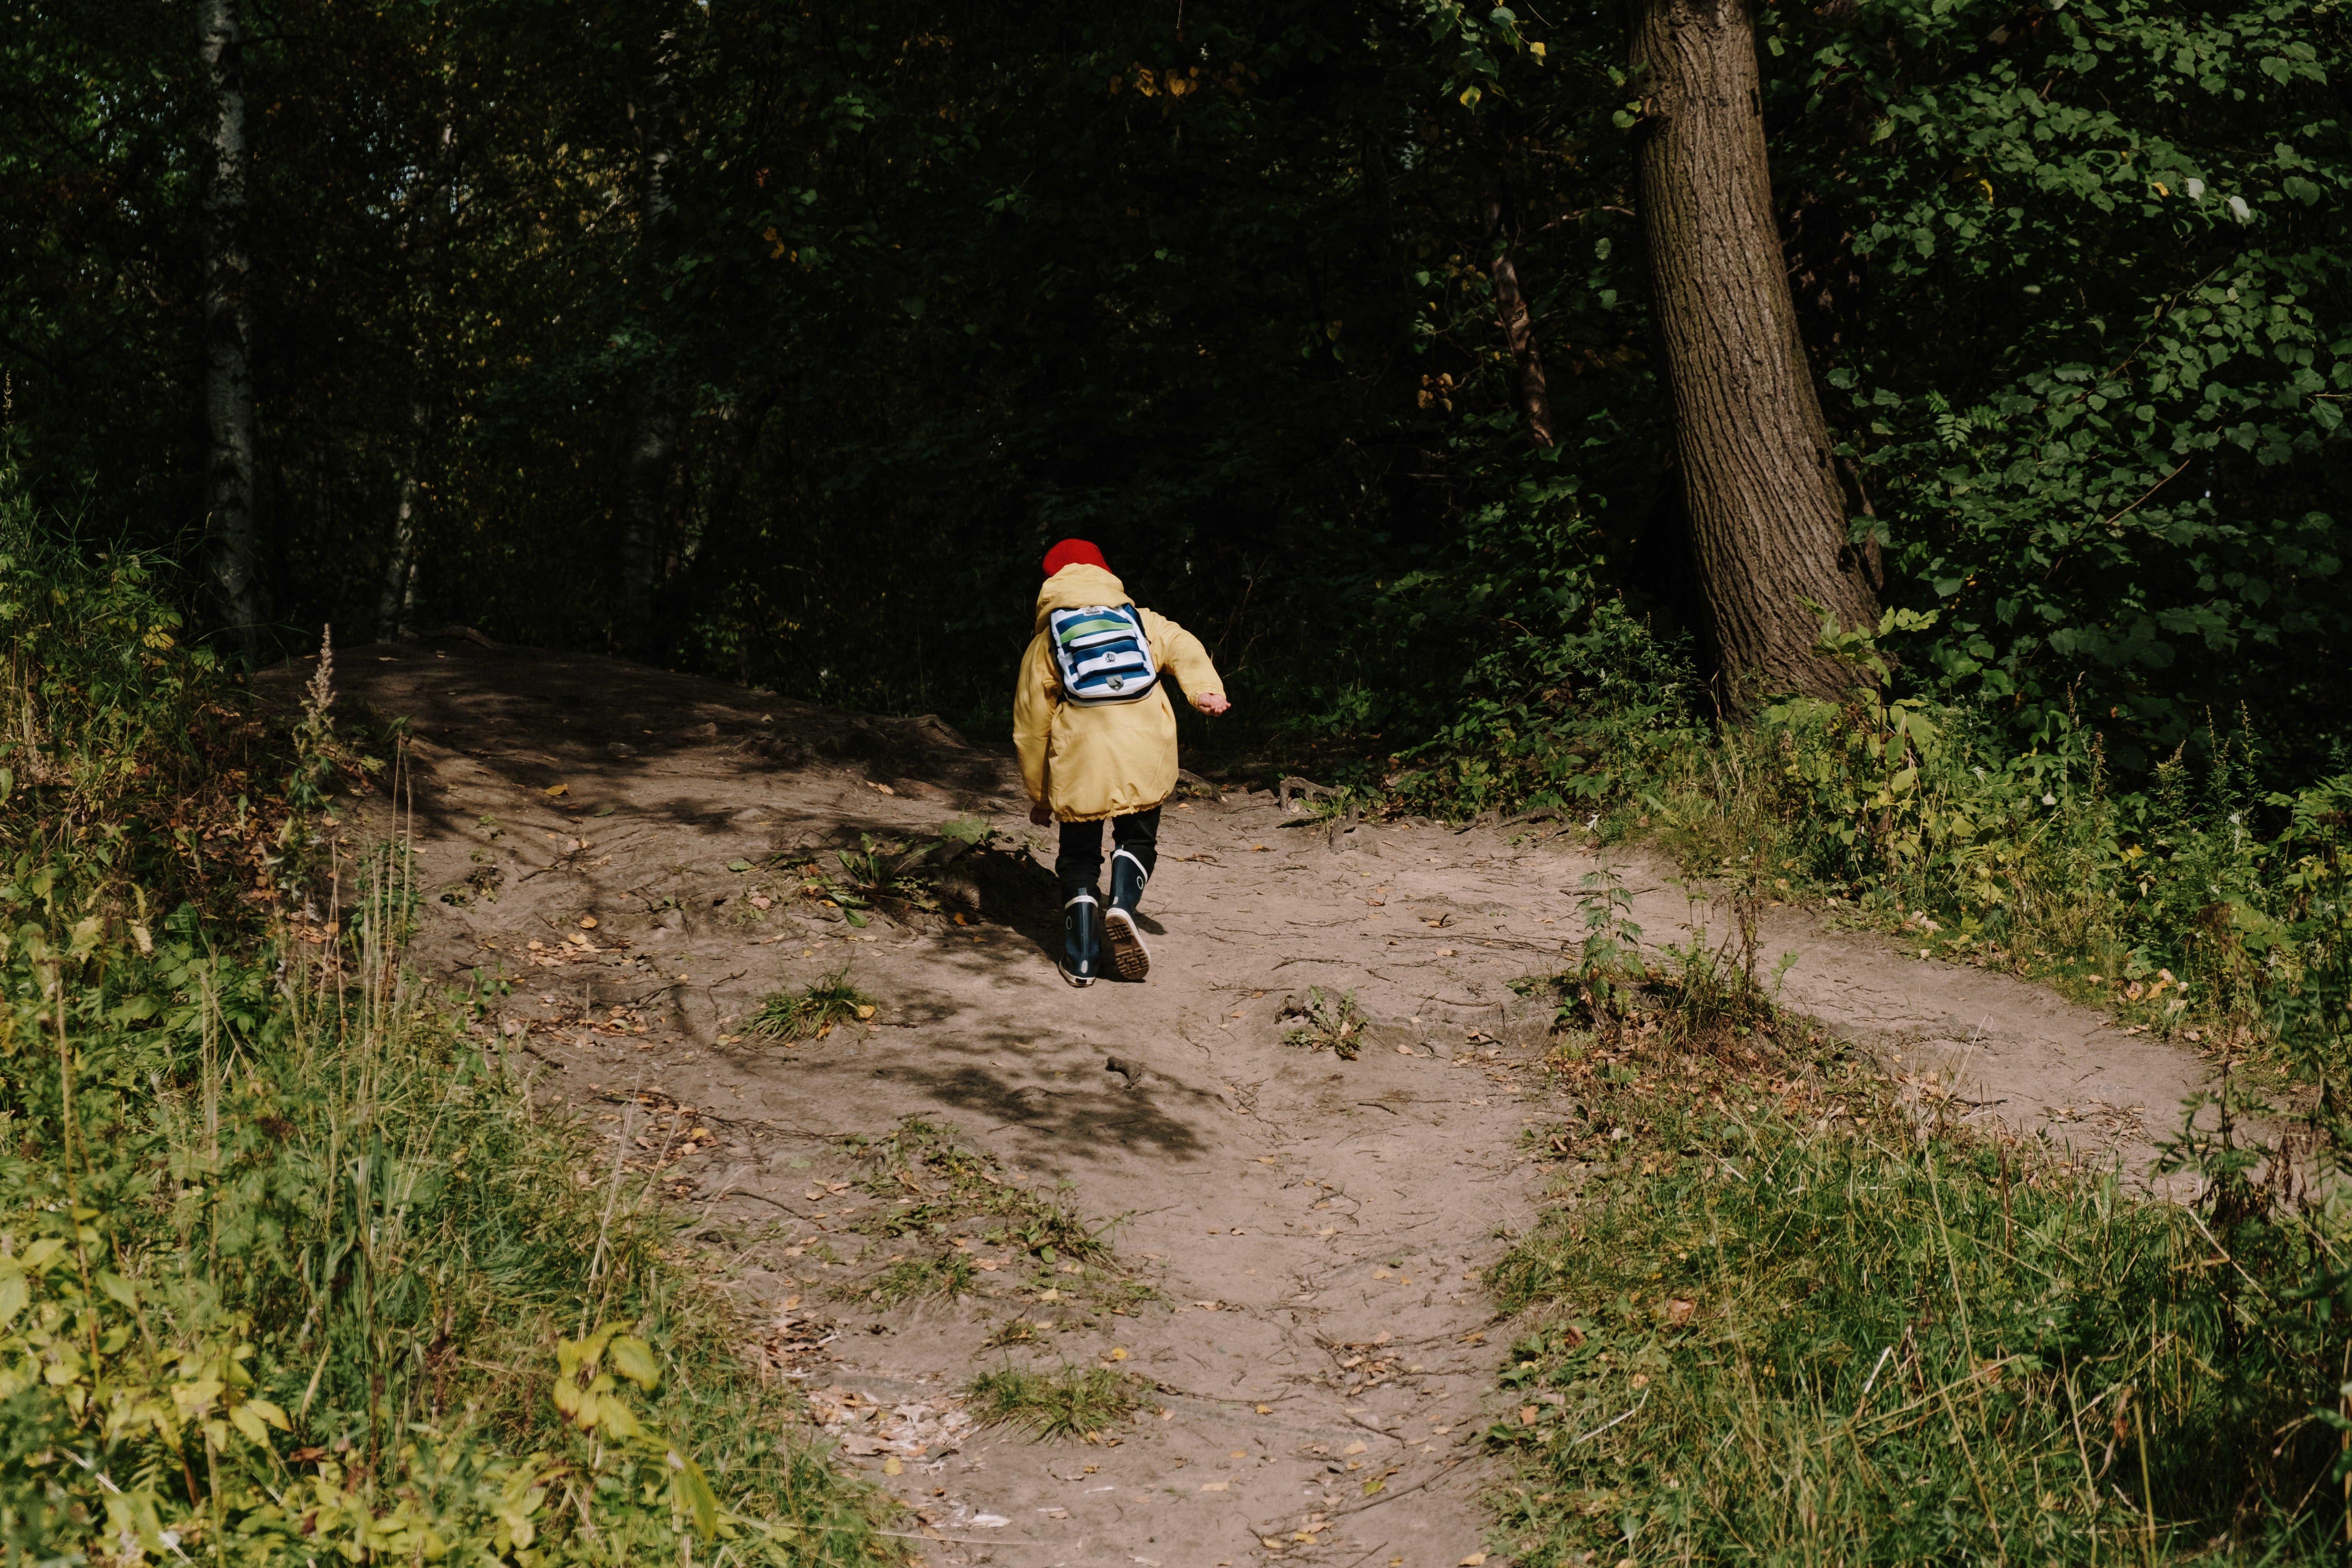 After seeing Mike, the little boy raced into the forest & disappeared. | Source: Pexels